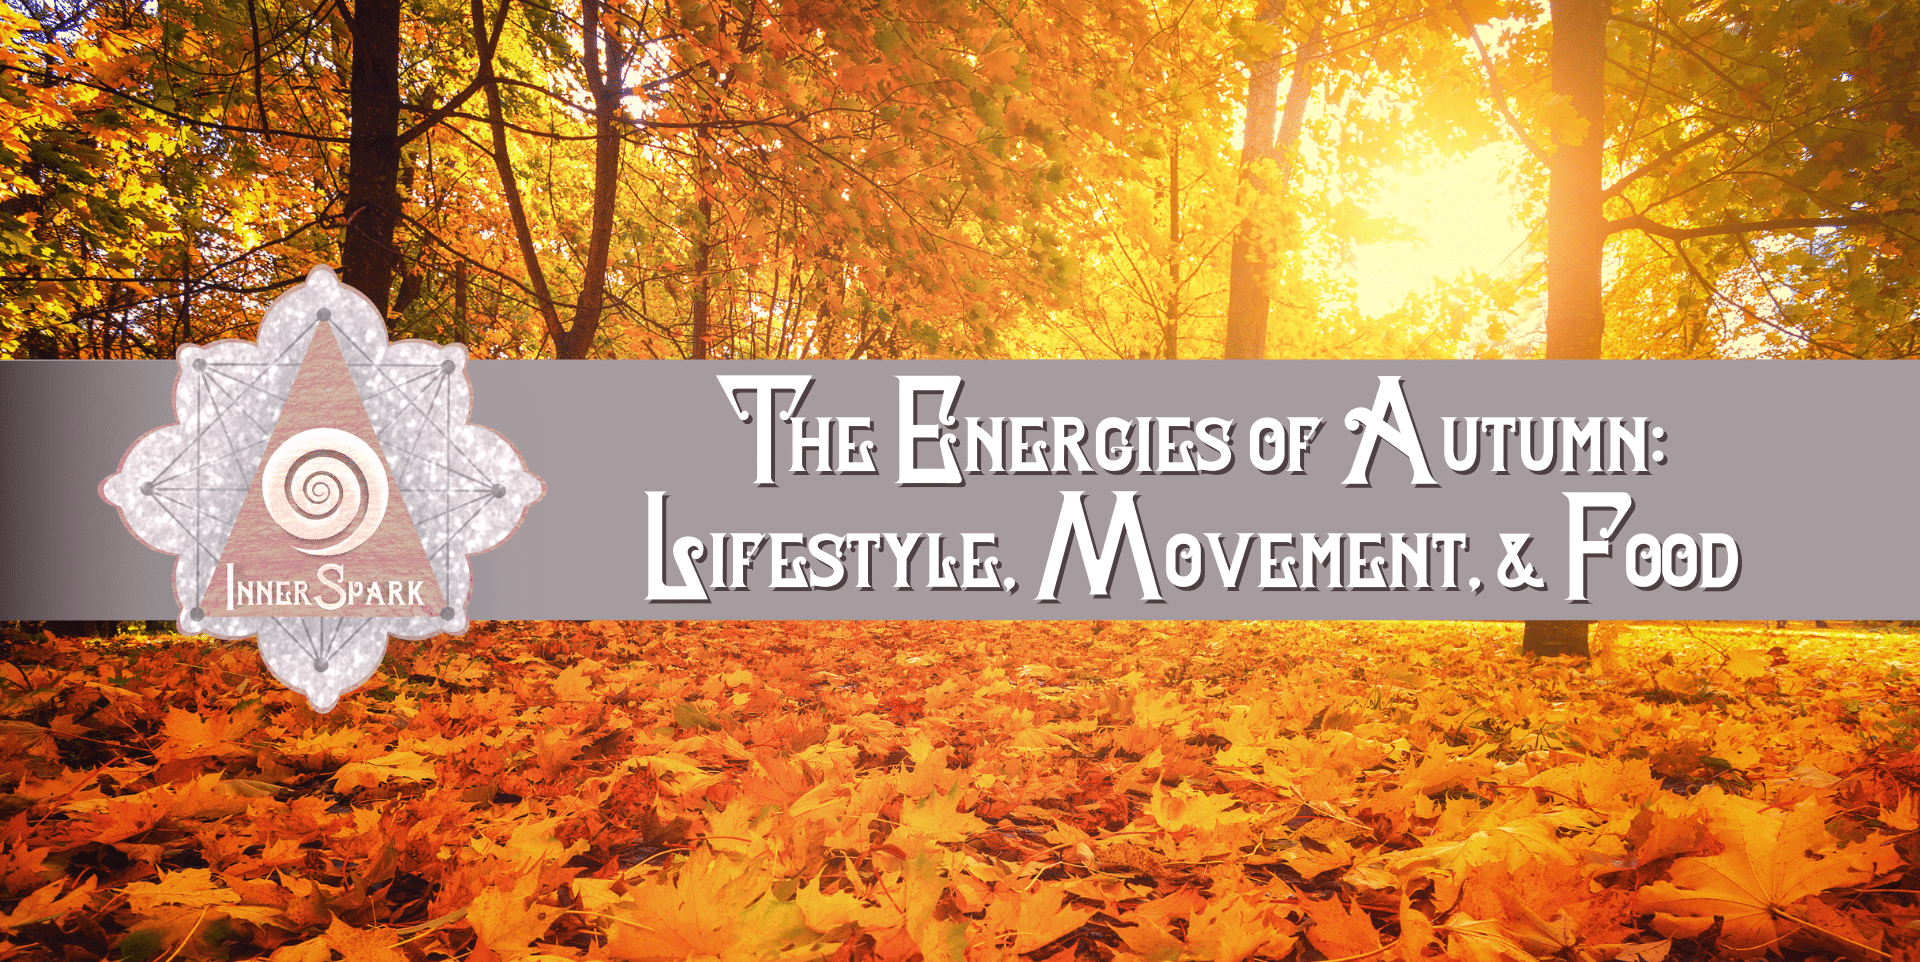 The Energies of Autumn: Lifestyle, Movement, & Food